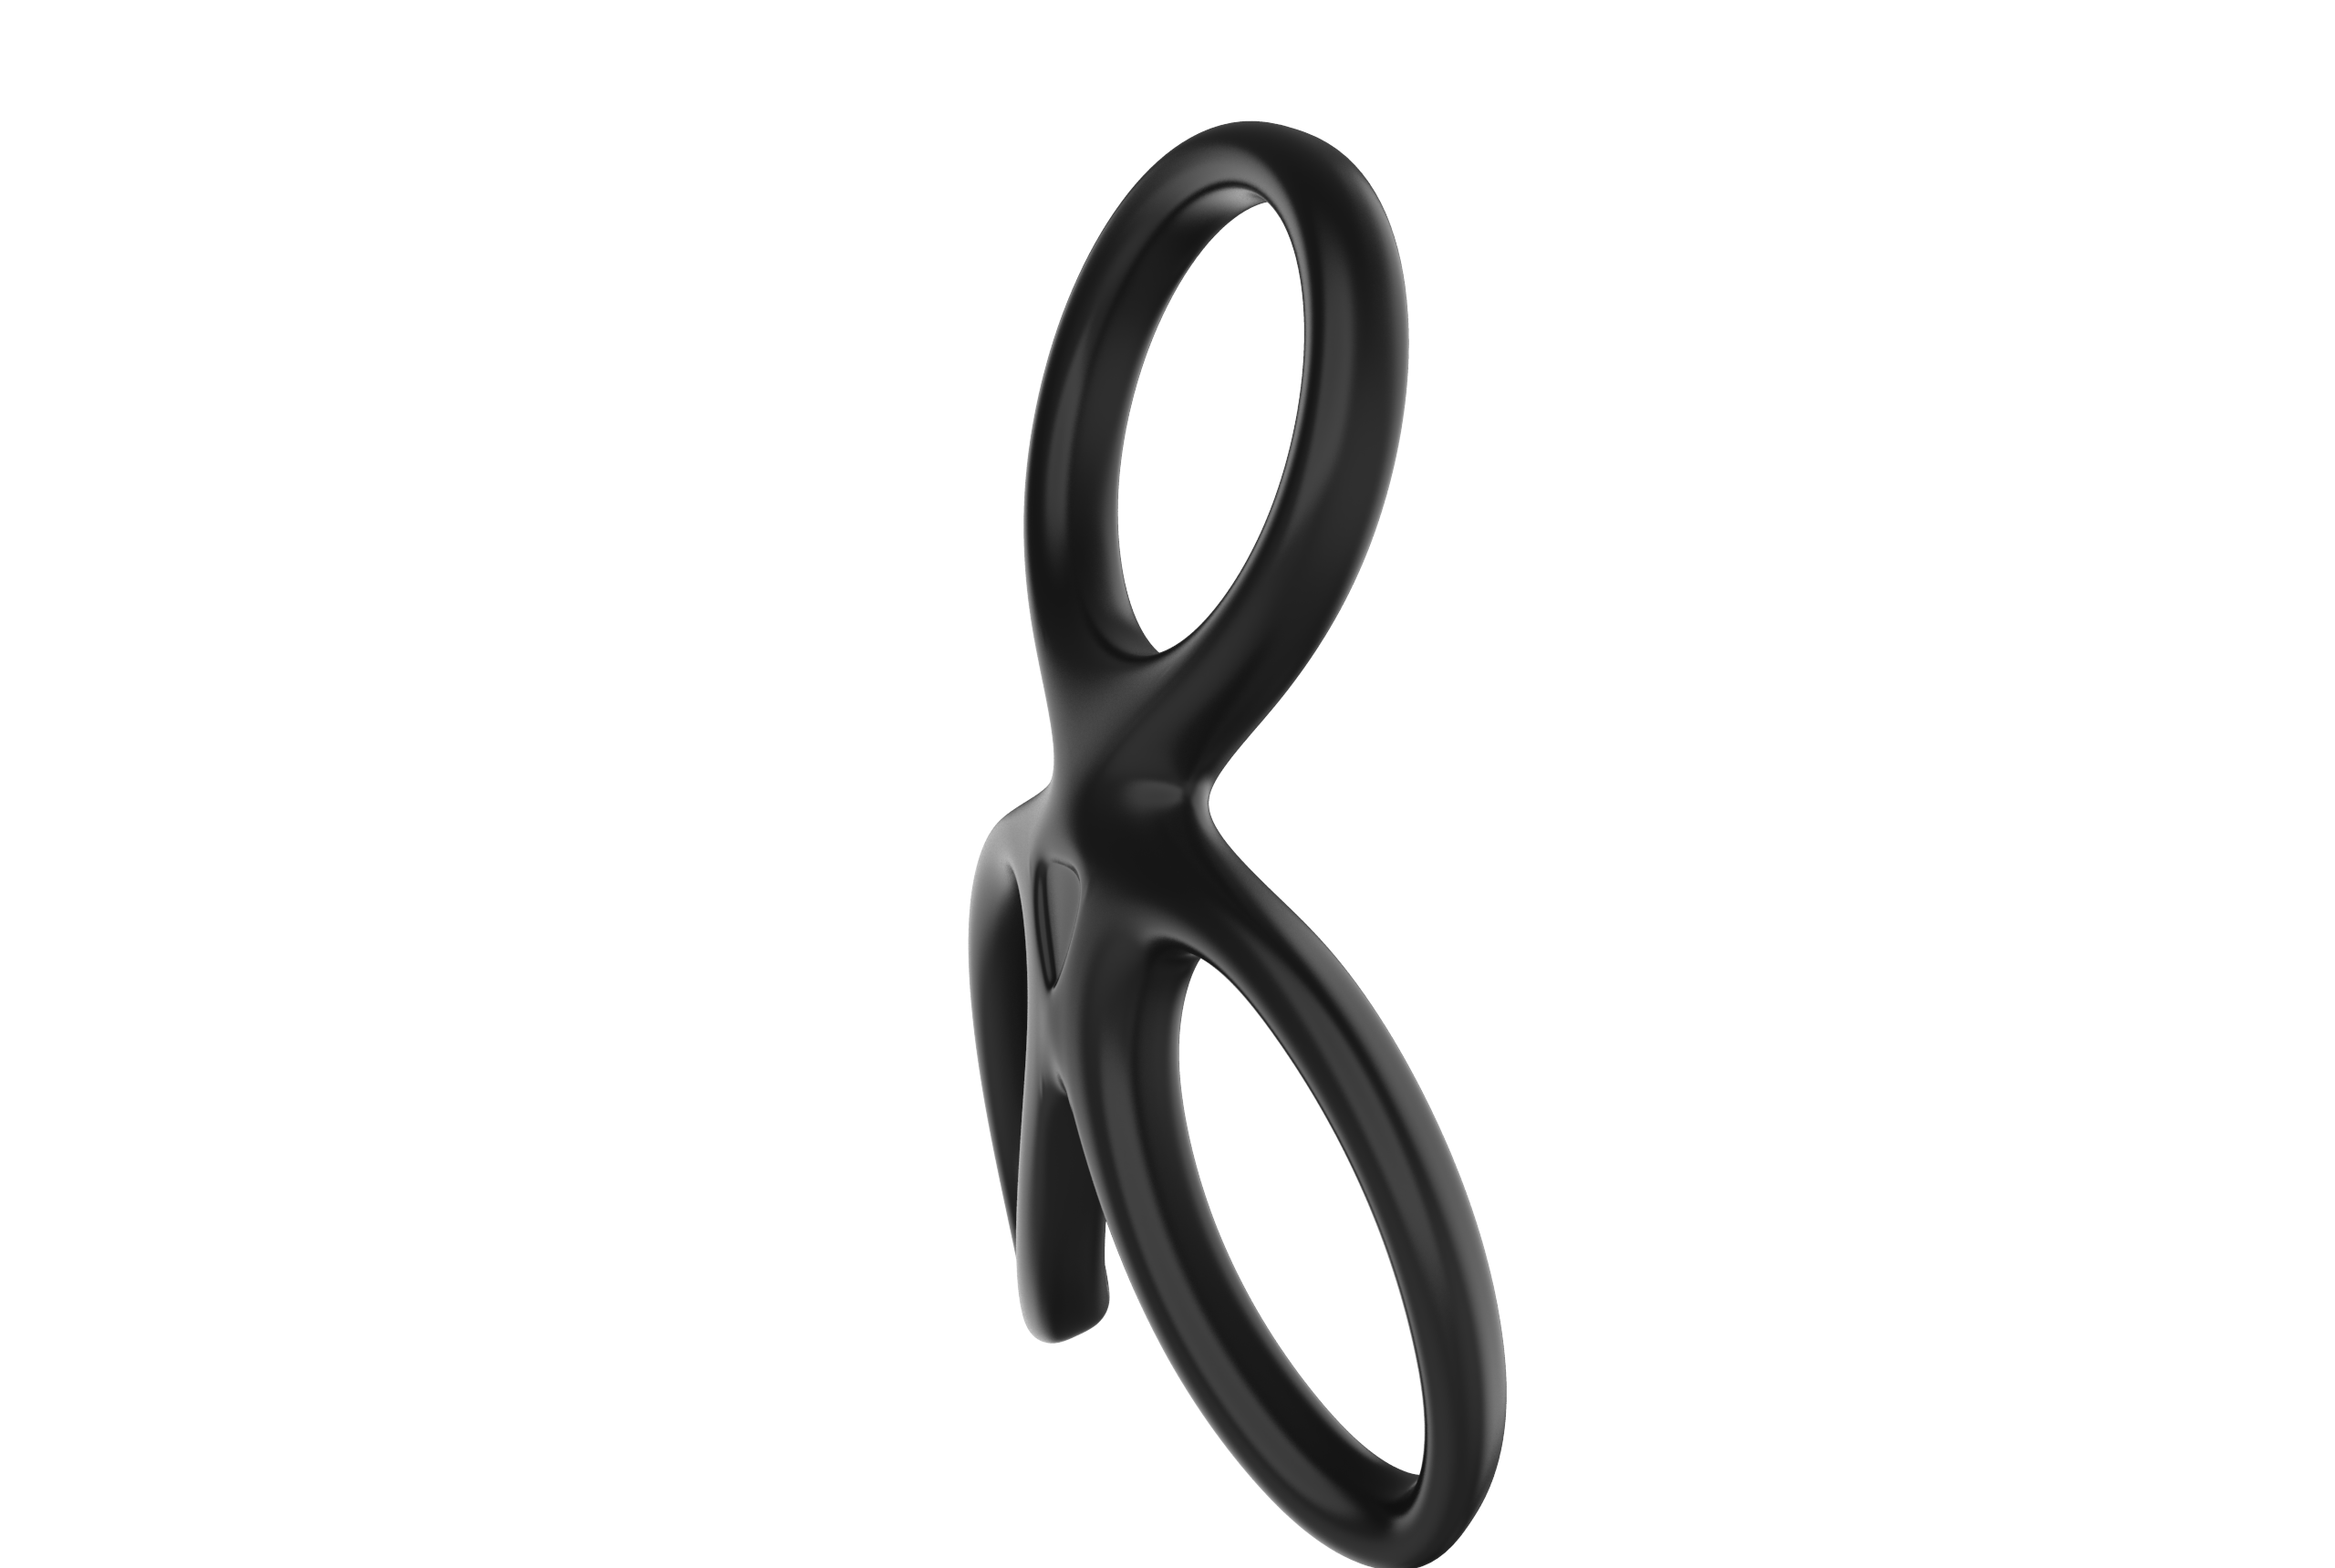 Oleifun Cock Ring 3-in-1 Silicone Elastic Penis Rings Physical Stamina Trainer Longer Erection & Delay Ejaculation